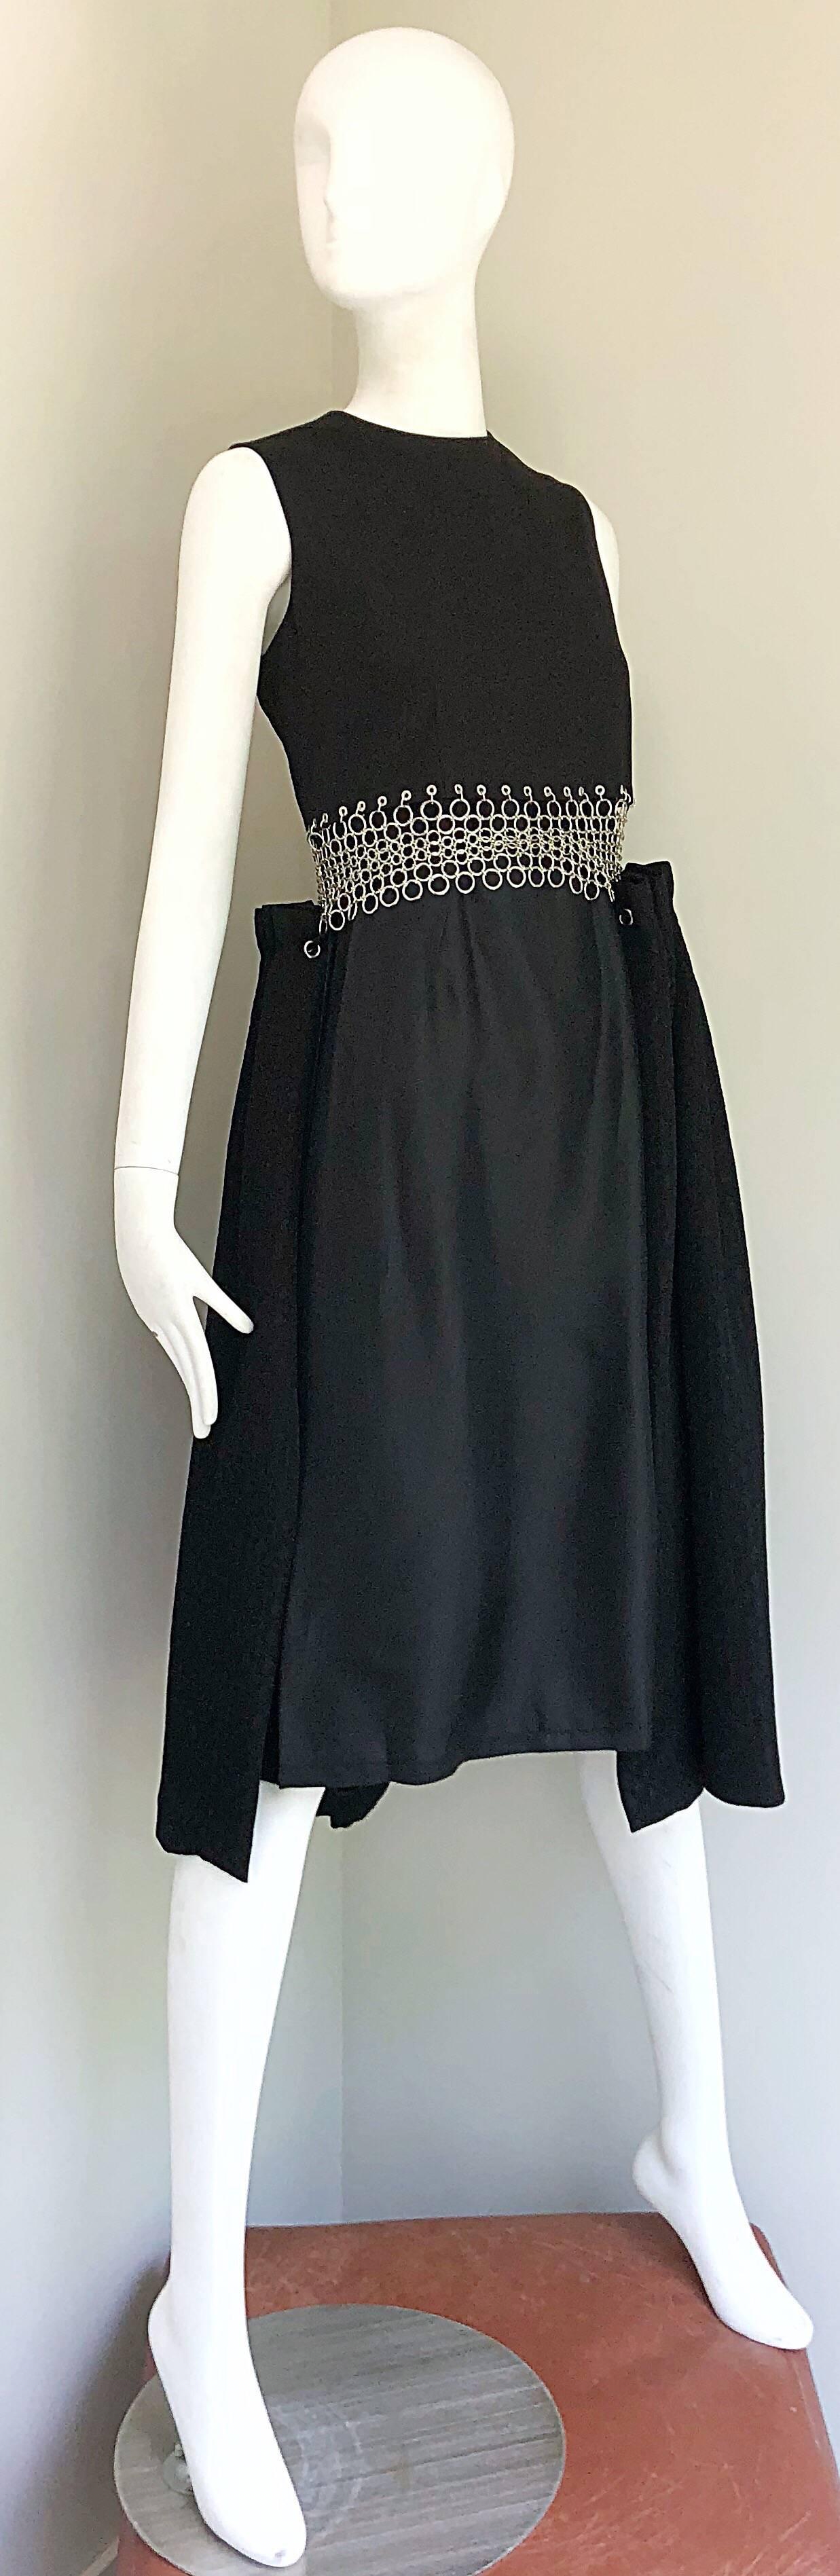 New Comme Des Garcons Noir Kei Ninomiya Black + Silver Grommets Cotton Dress In New Condition For Sale In San Diego, CA